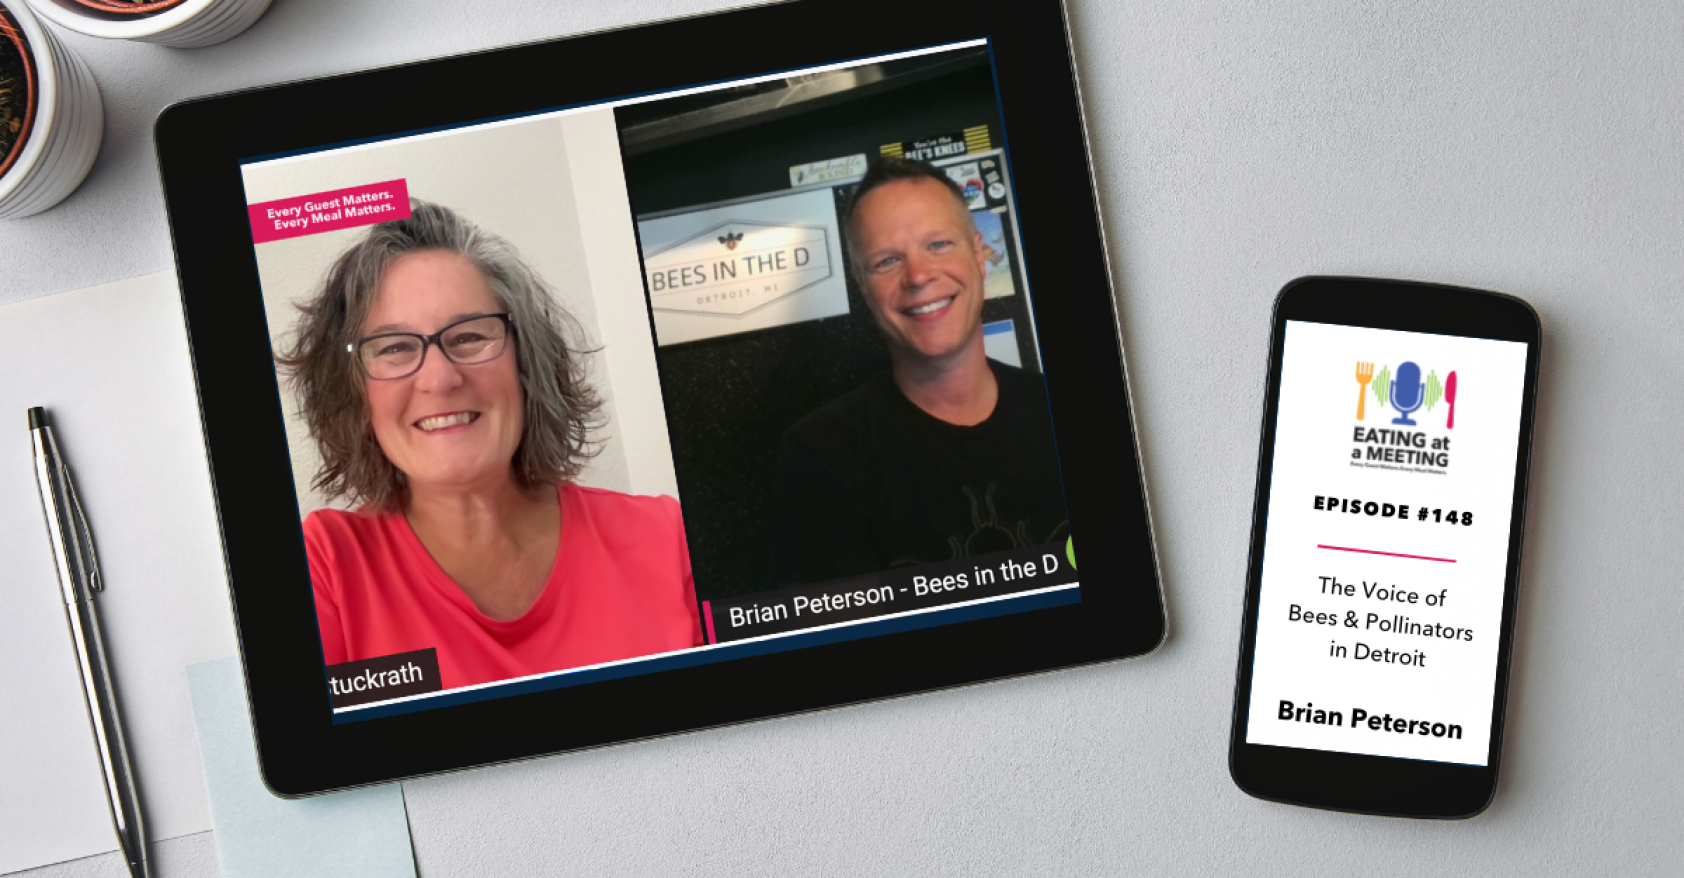 An iPad and iPhone on a table. On the iPad is a picture of two women who are on video screen. On the iphone is the Eating at a Meeting podcast logo with Episode #147 Learning to Use the 5 Dimensions of Wellbeing with Brian Peterson Bees in the D